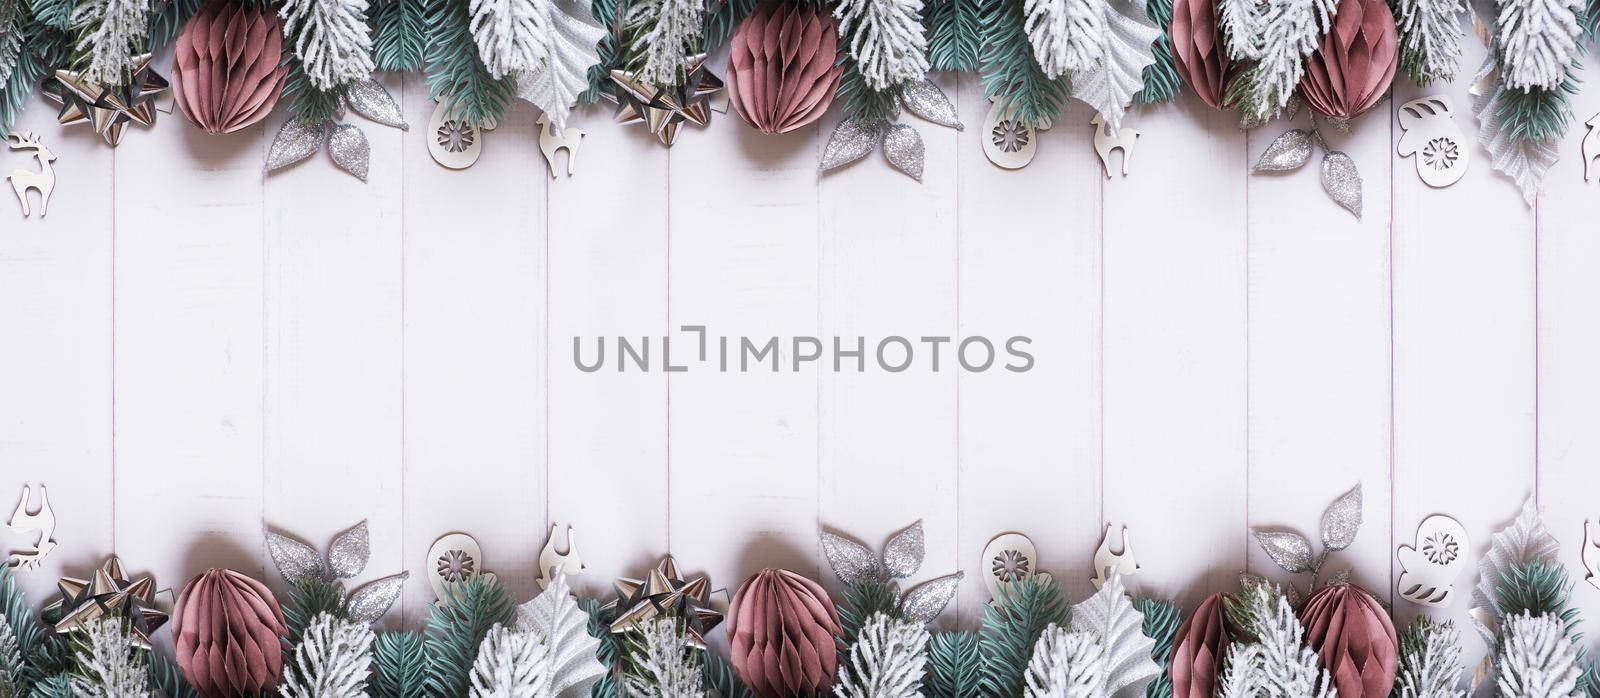 Christmas banner with flat lay snow pine trees, paper and wooden Christmas toys on wooden background by ssvimaliss